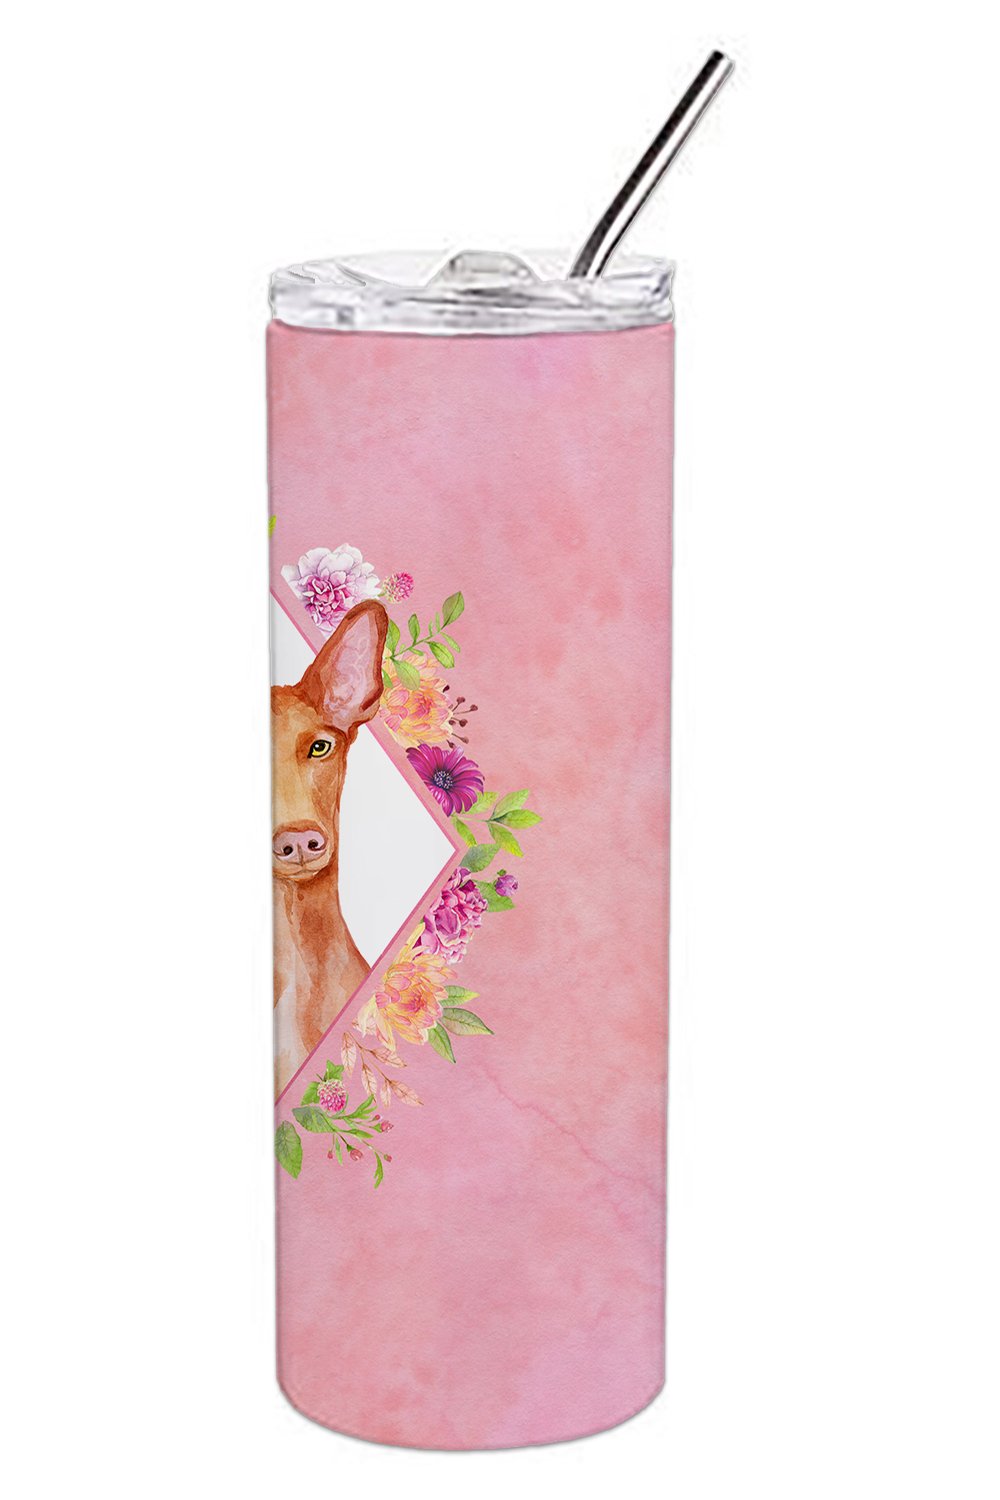 Pharaoh Hound Pink Flowers Double Walled Stainless Steel 20 oz Skinny Tumbler CK4168TBL20 by Caroline's Treasures